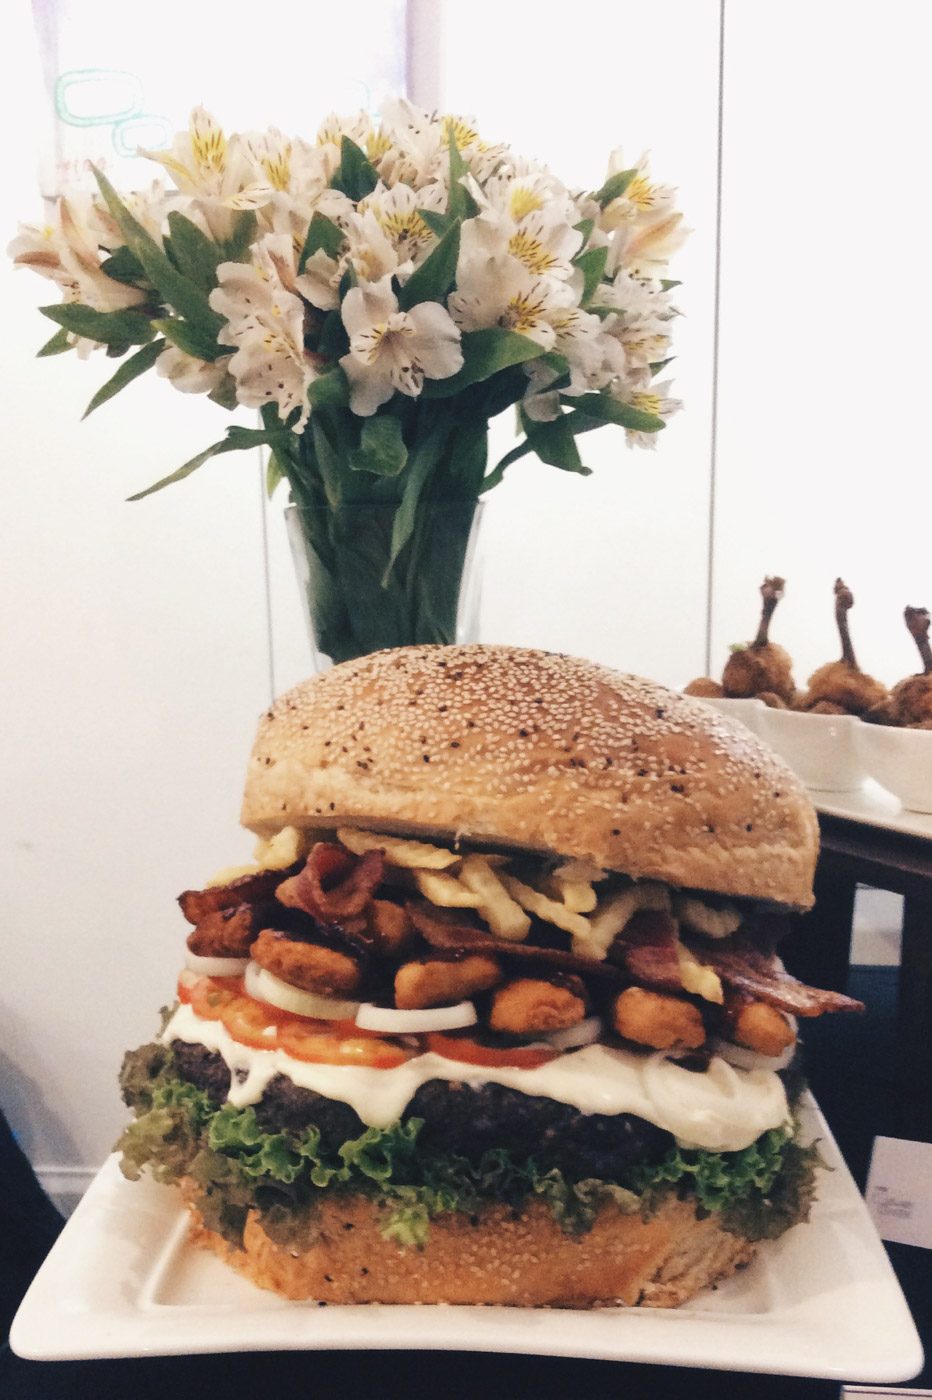 MONSTER BURGER. The angus burger is served with vegetables, cheese, chicken nuggets, fries and bacon. 